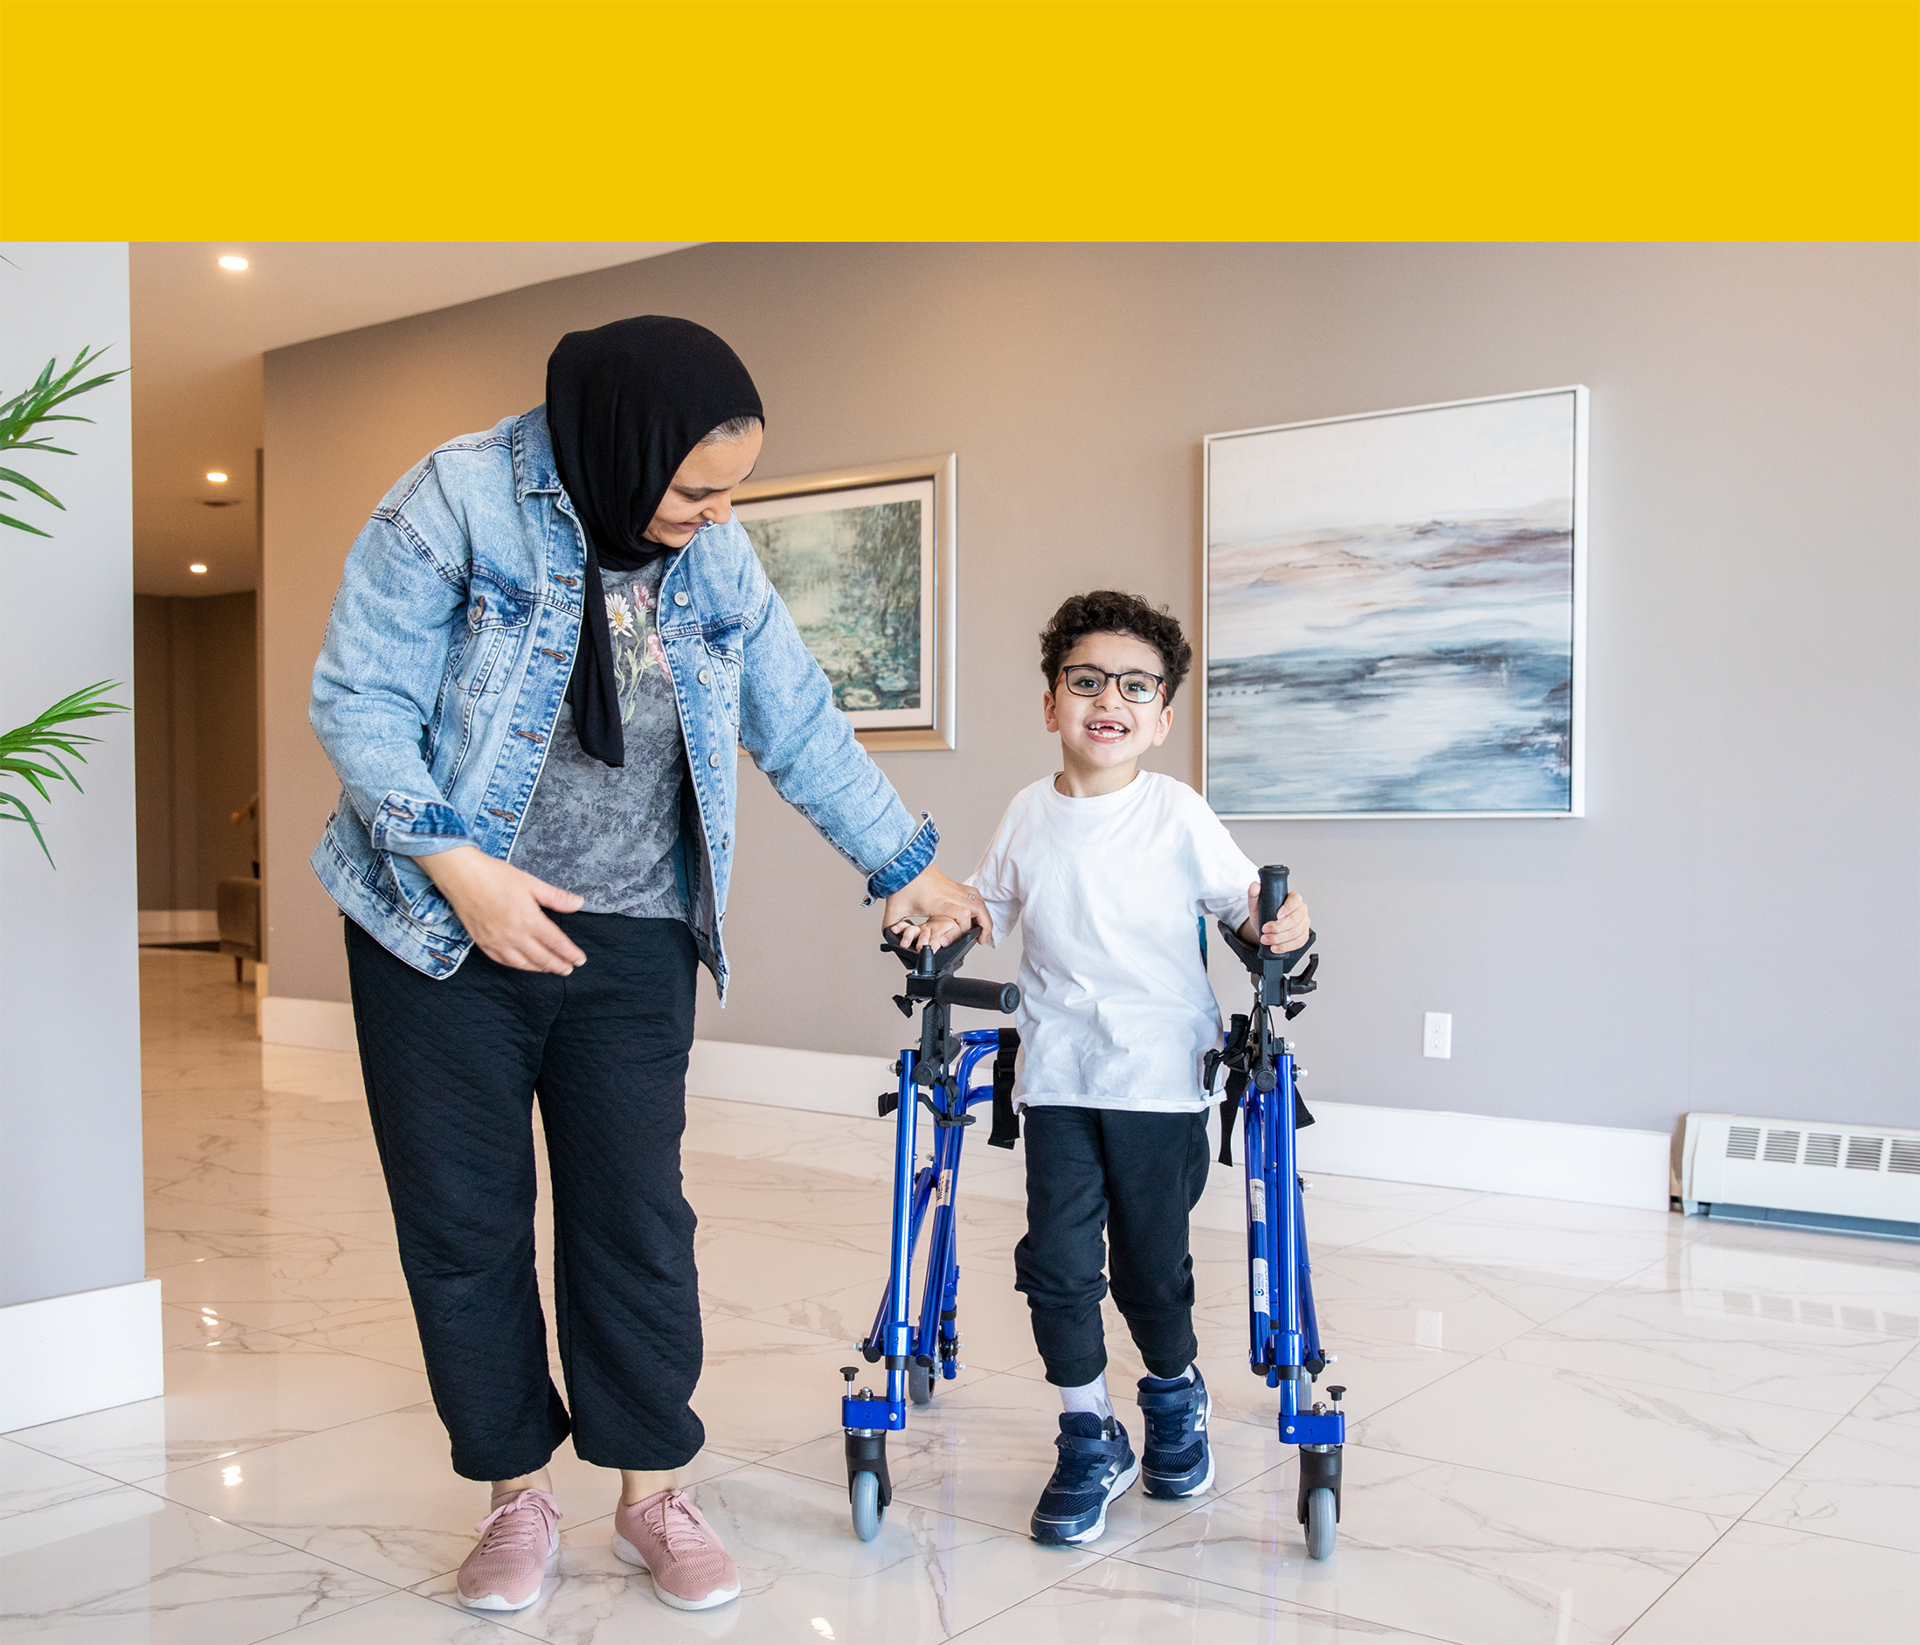 Smiling Yousef walking using a supportive walker beside his mother Ola